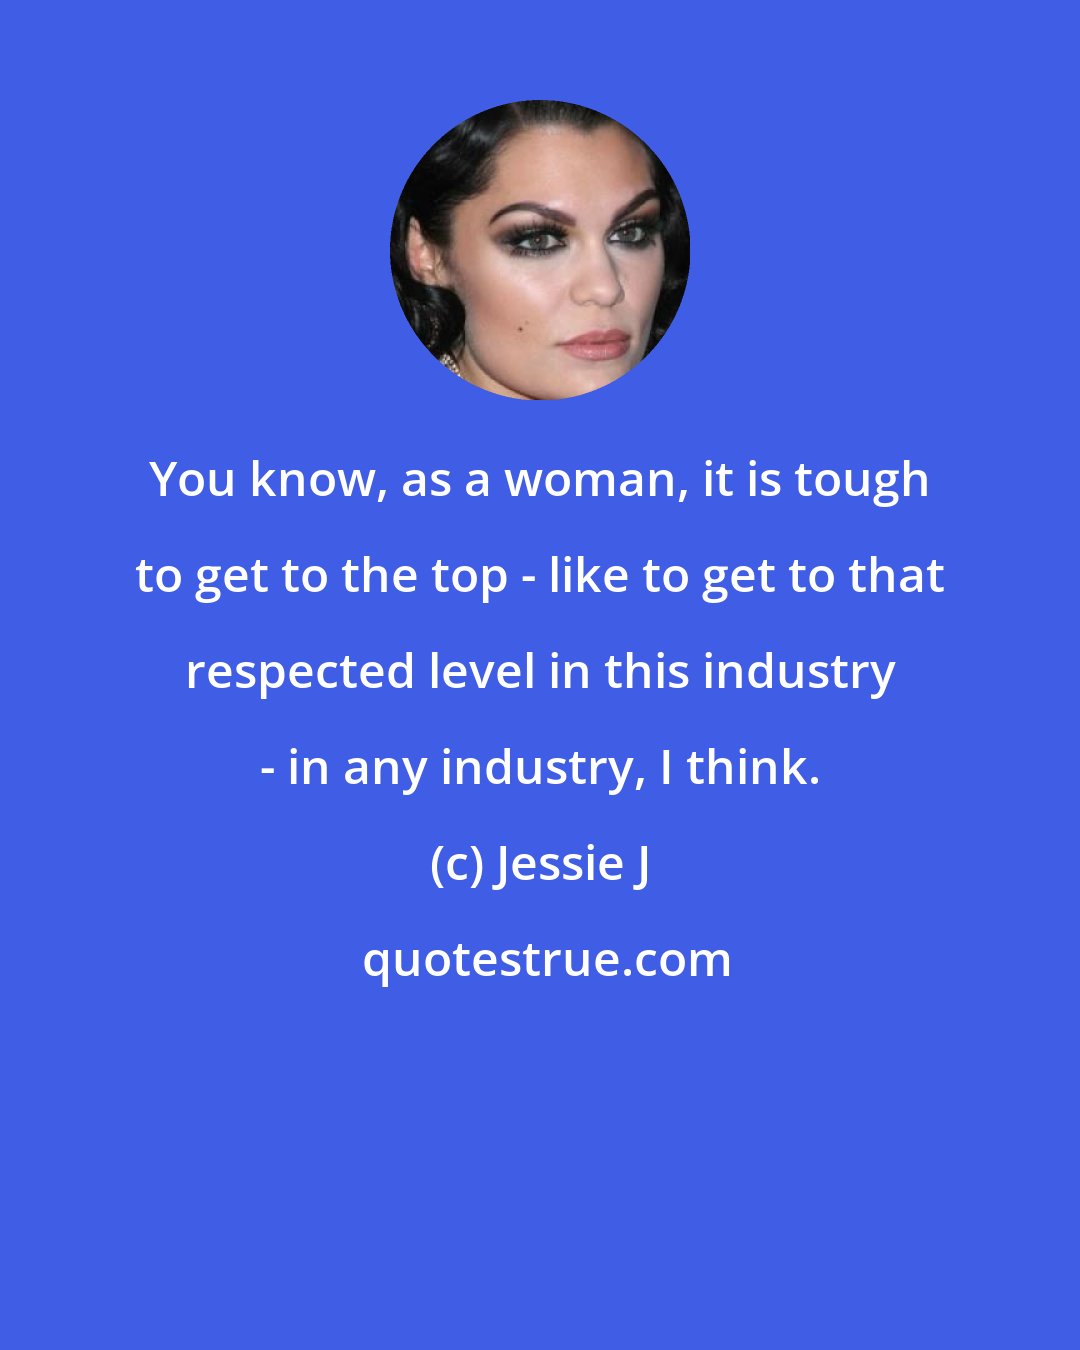 Jessie J: You know, as a woman, it is tough to get to the top - like to get to that respected level in this industry - in any industry, I think.